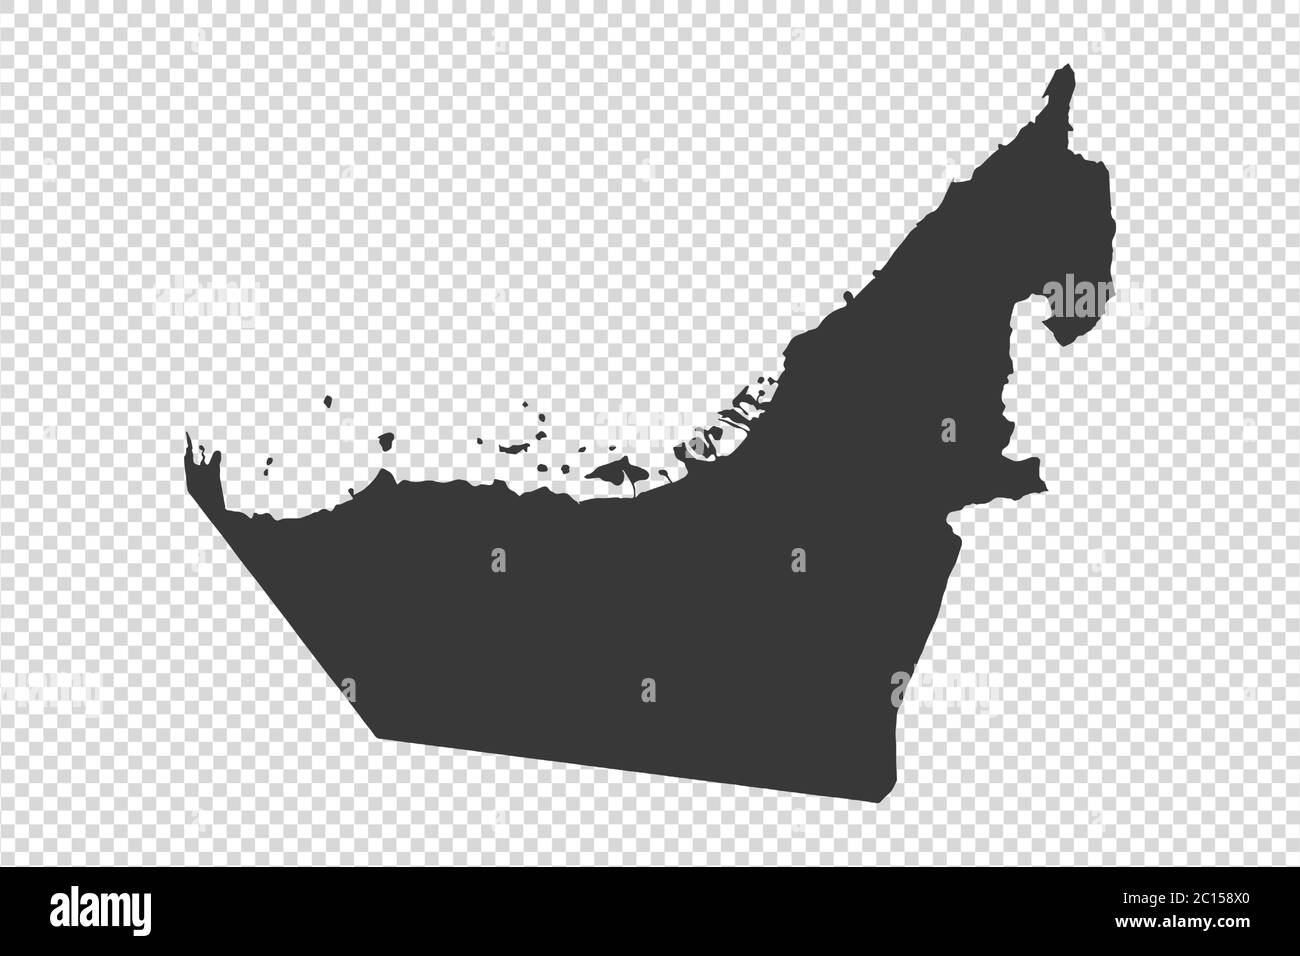 United Arab Emirates map with gray tone on   png or transparent  background,illustration,textured , Symbols of United Arab Emirates,vector illustratio Stock Vector